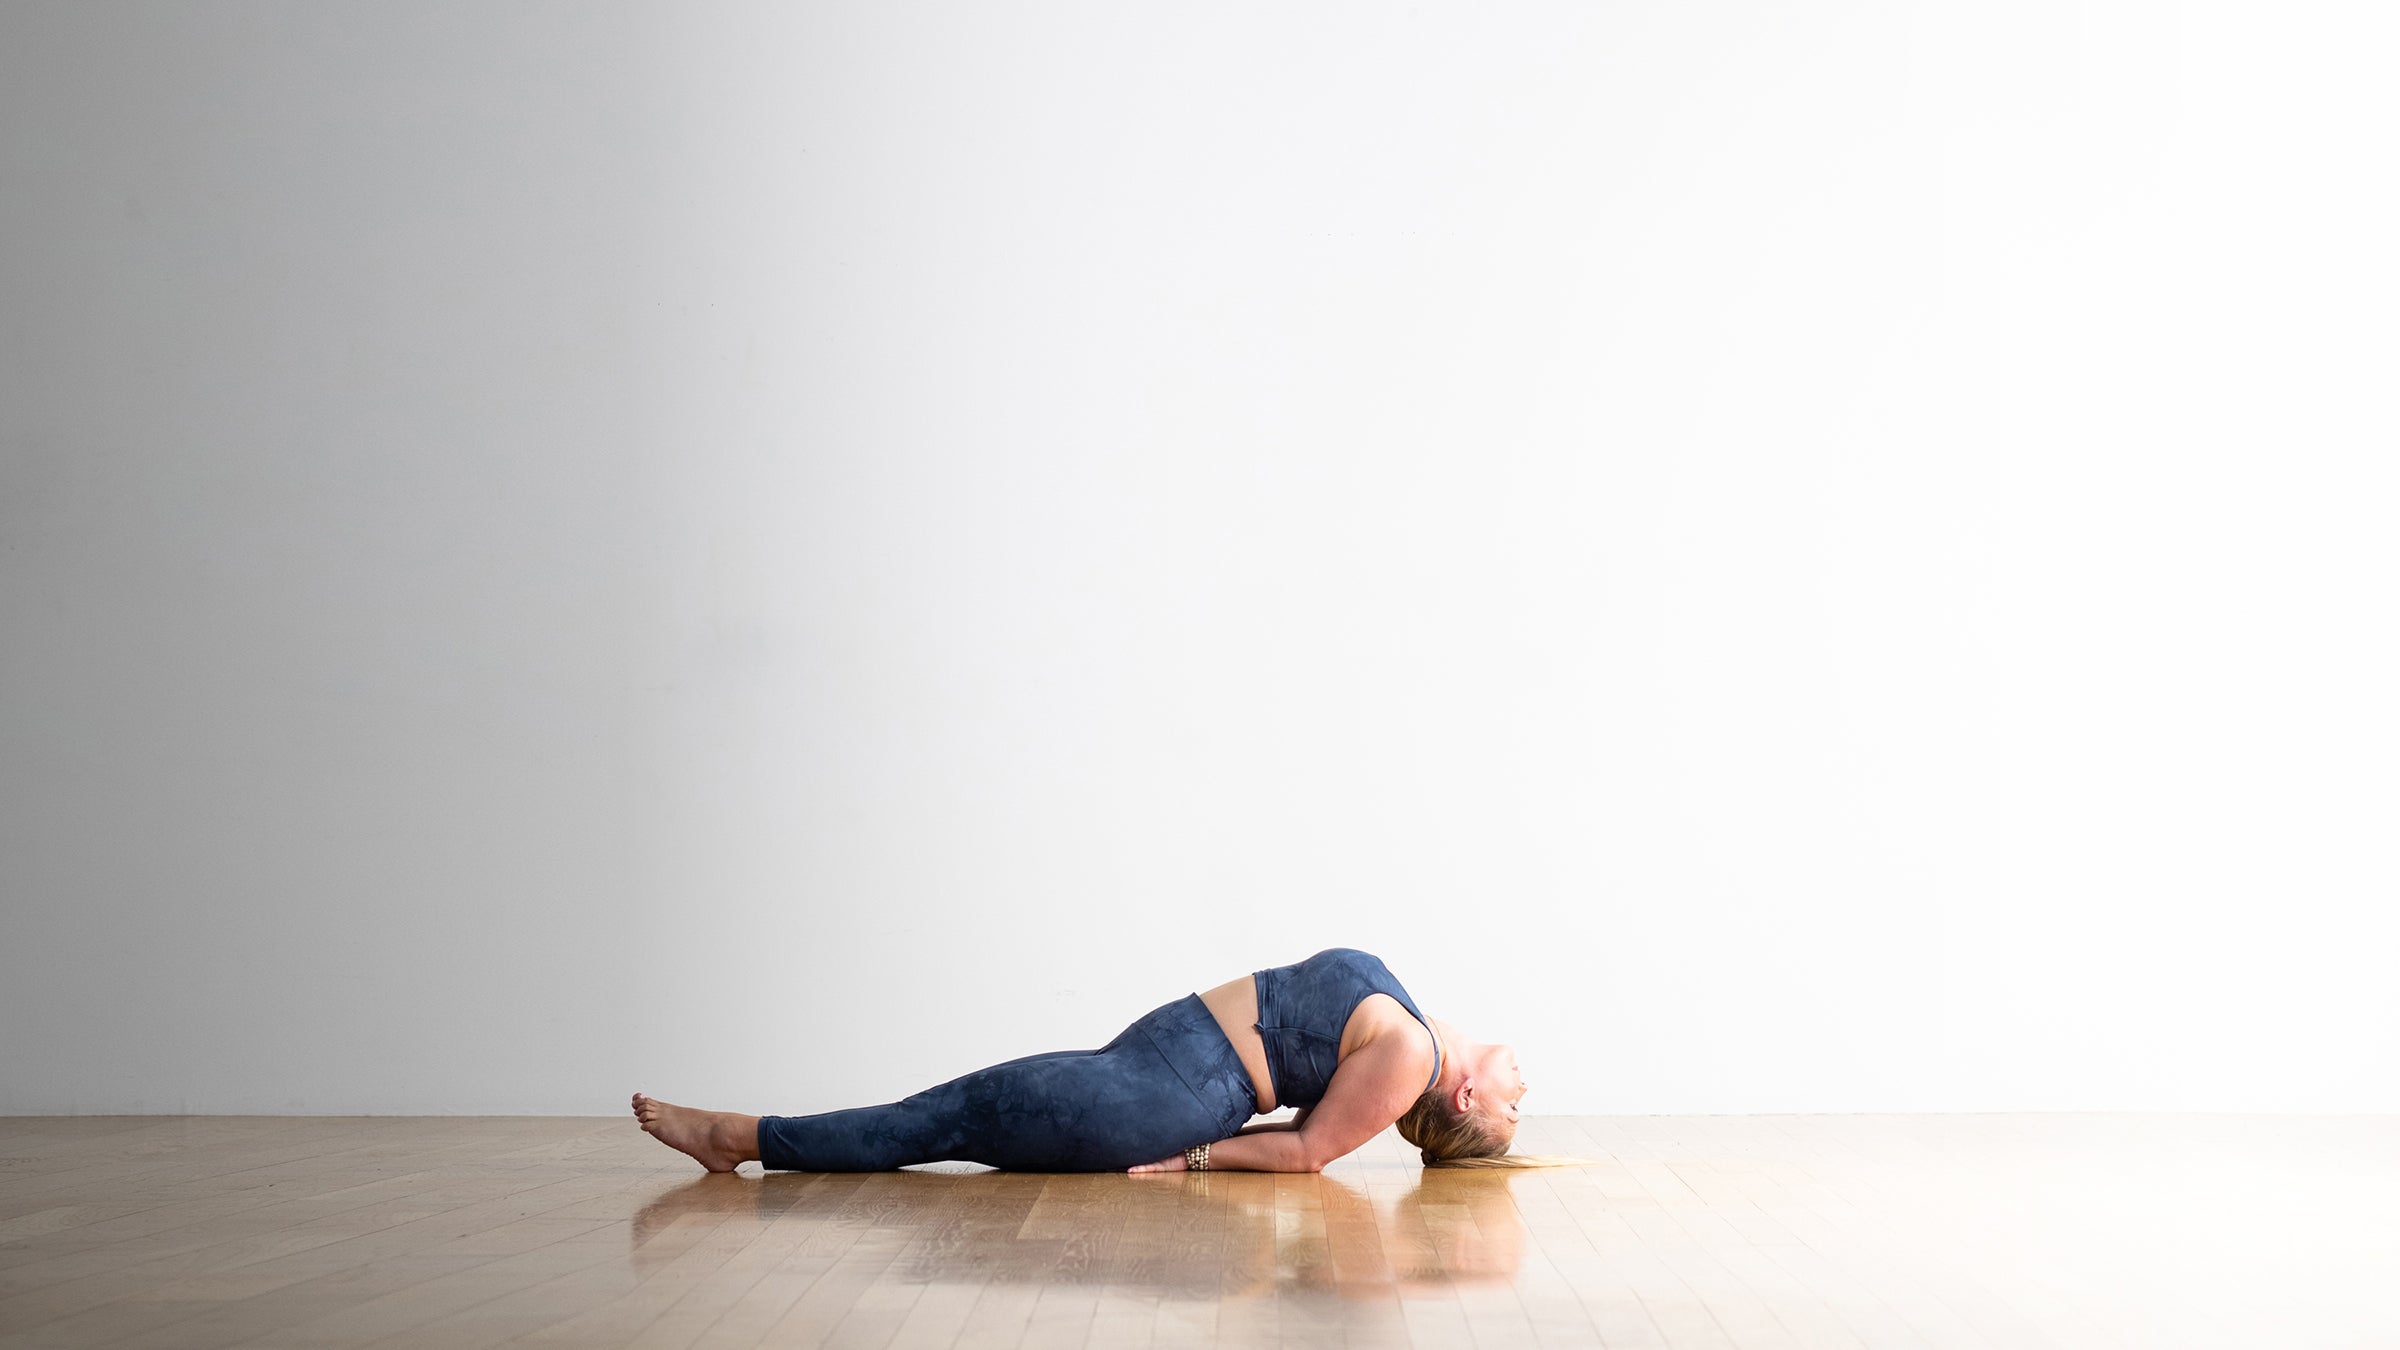 10 Yoga Poses For A Cold That'll Nurse Your Body Back To Health